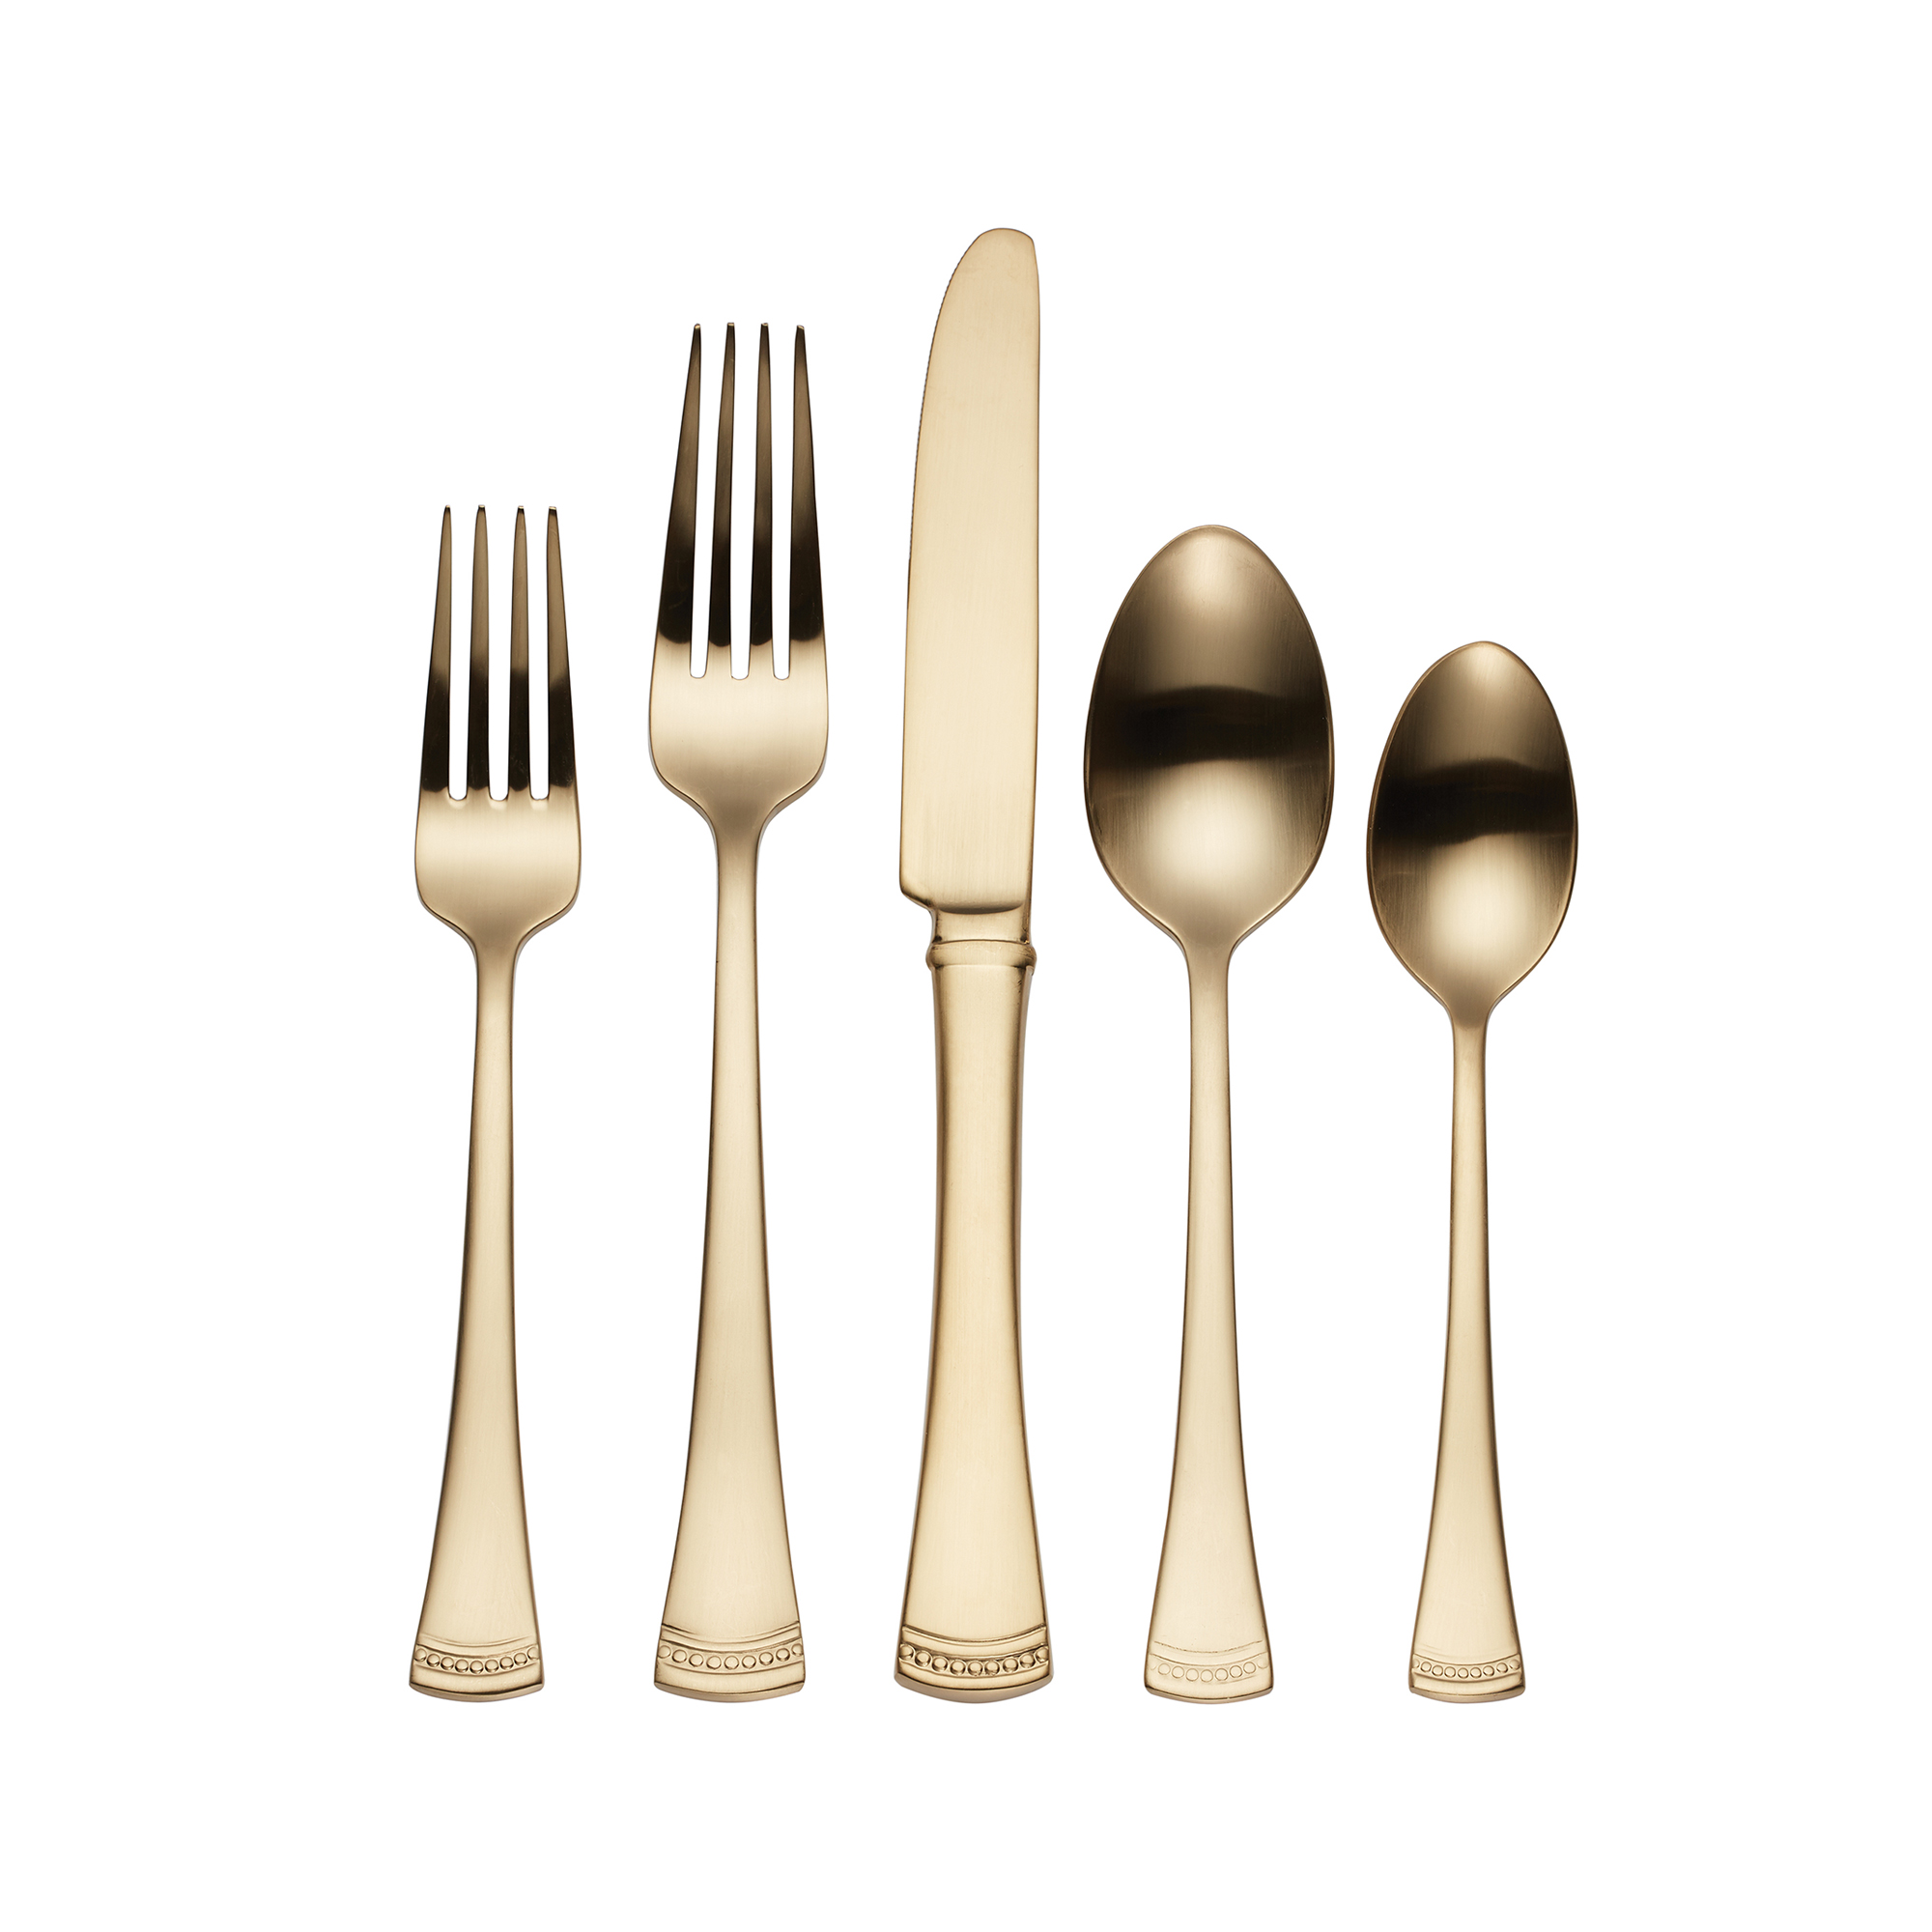 Lenox "Portola" 20-pc. Service for 4 Gold-Colored Stainless Steel Flatware  Set | Ross-Simons